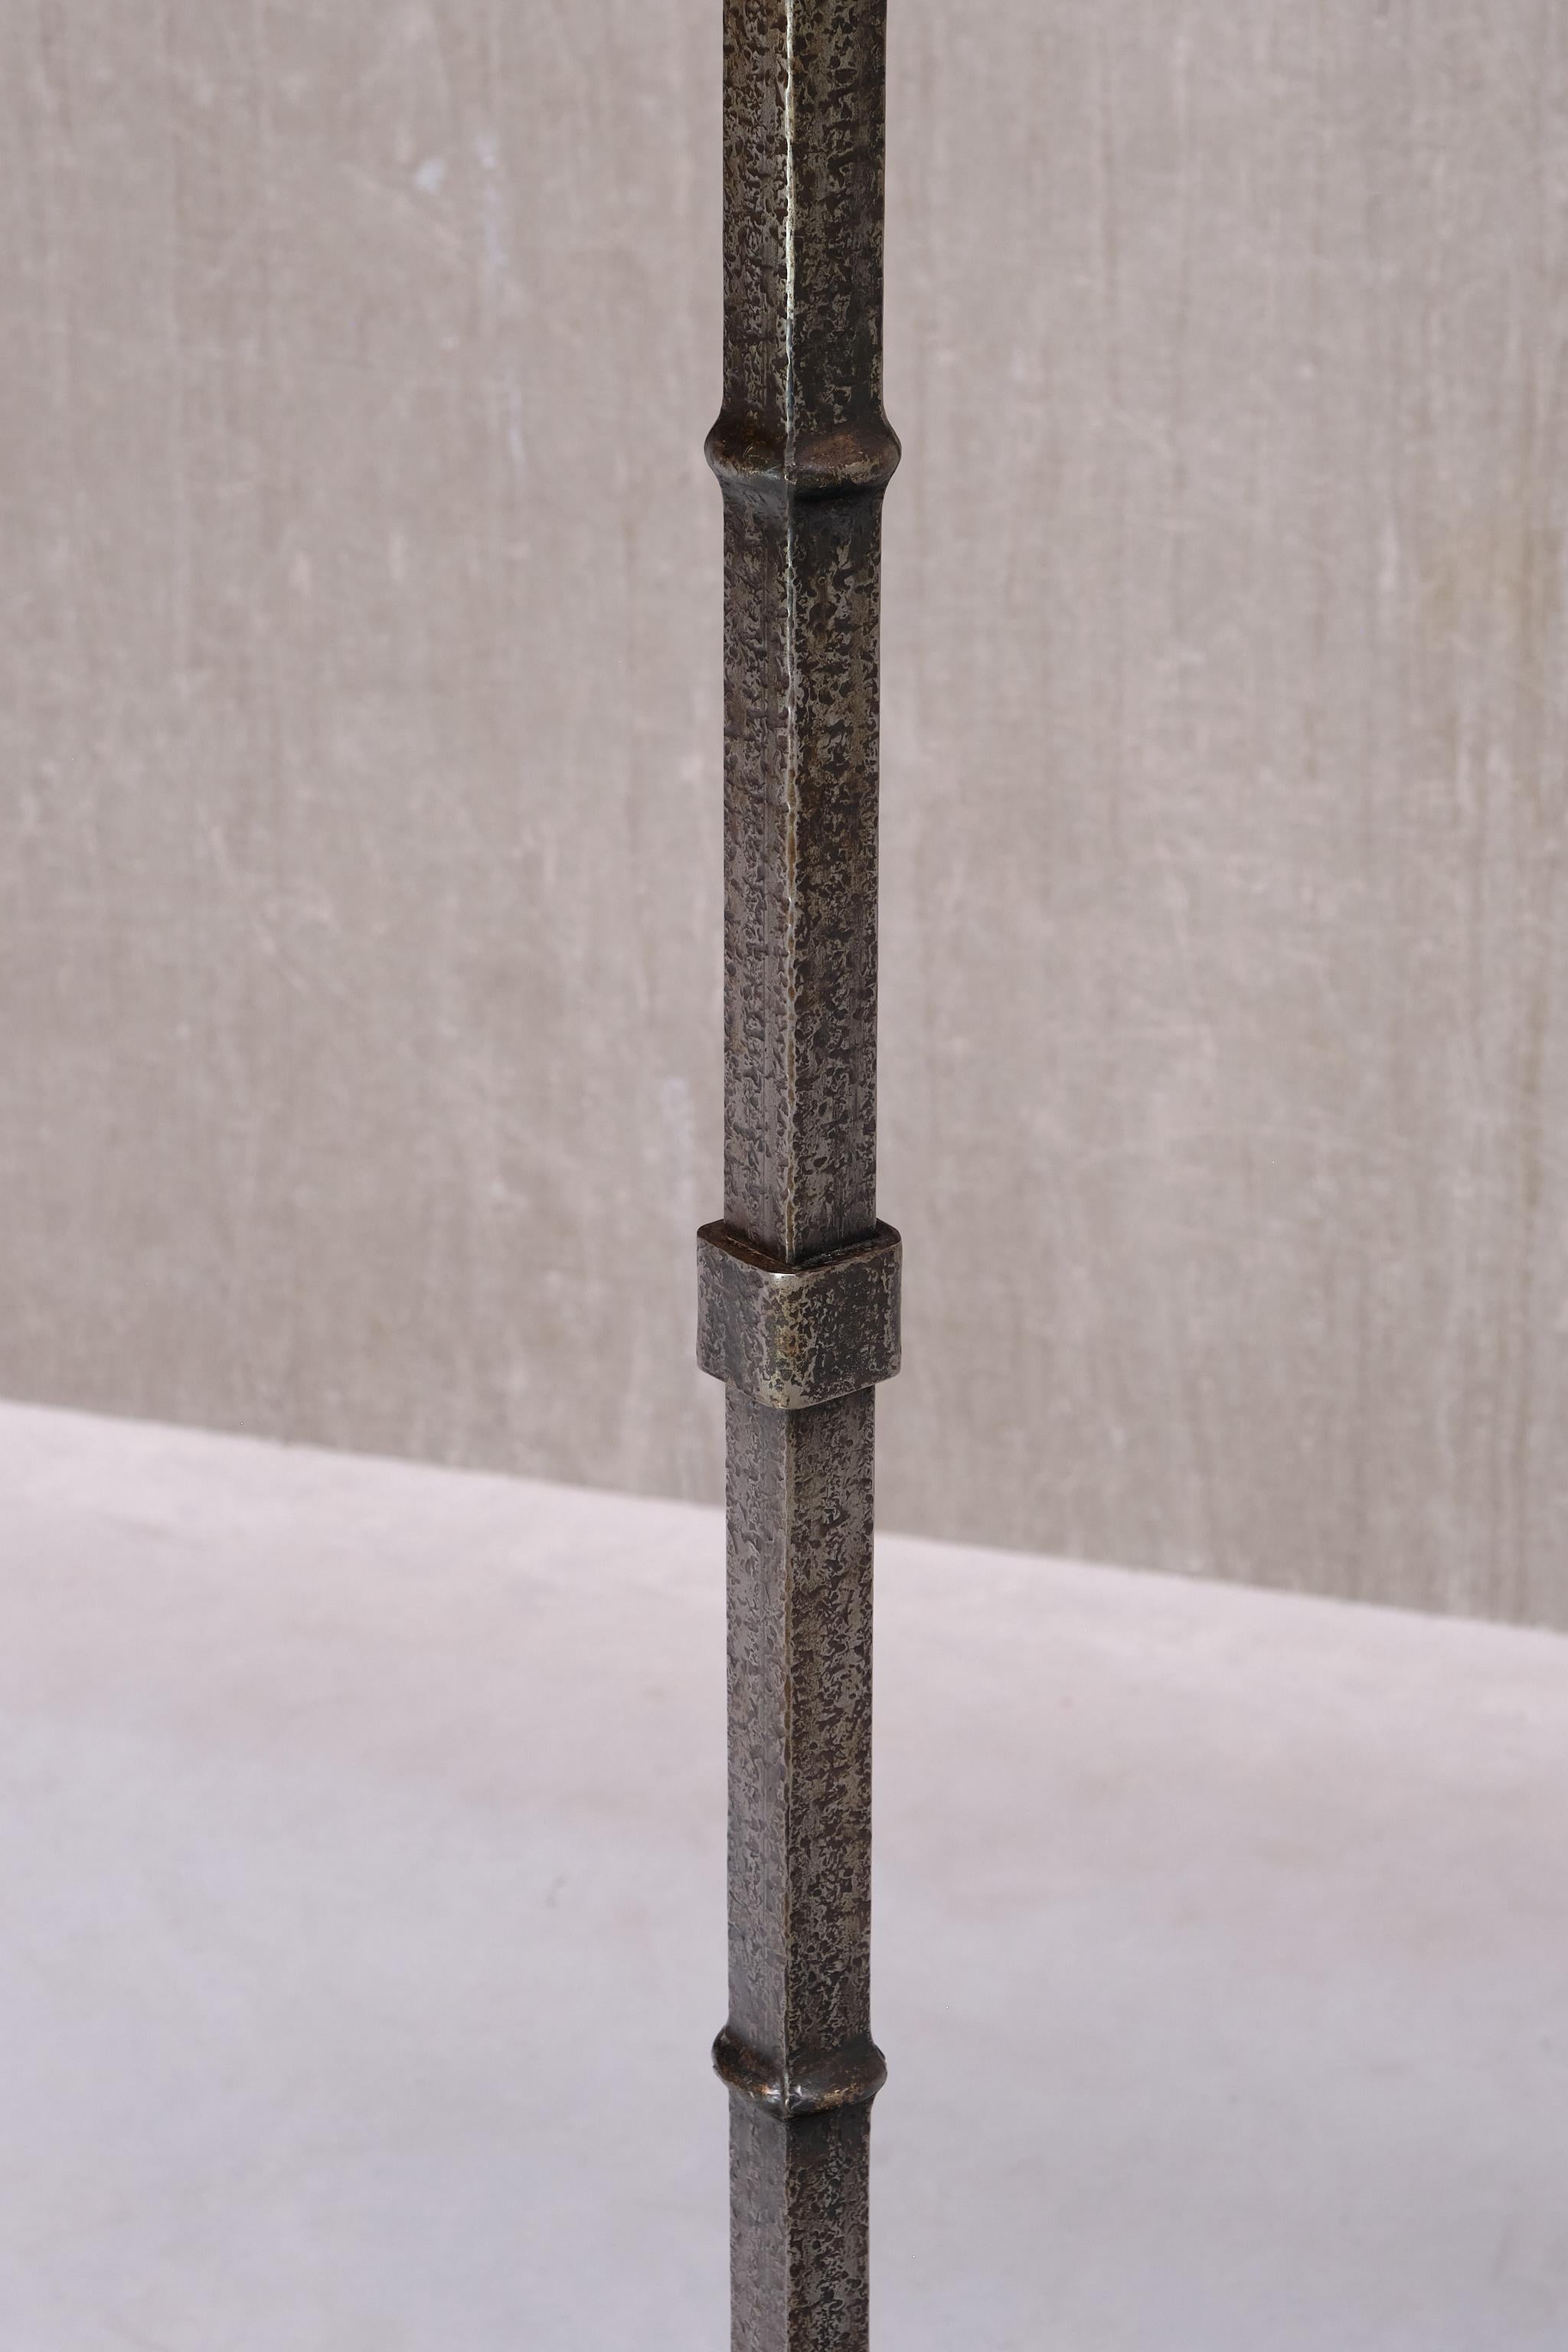 Sculptural French Modern Three Legged Floor Lamp in Wrought Iron, 1950s In Good Condition For Sale In The Hague, NL